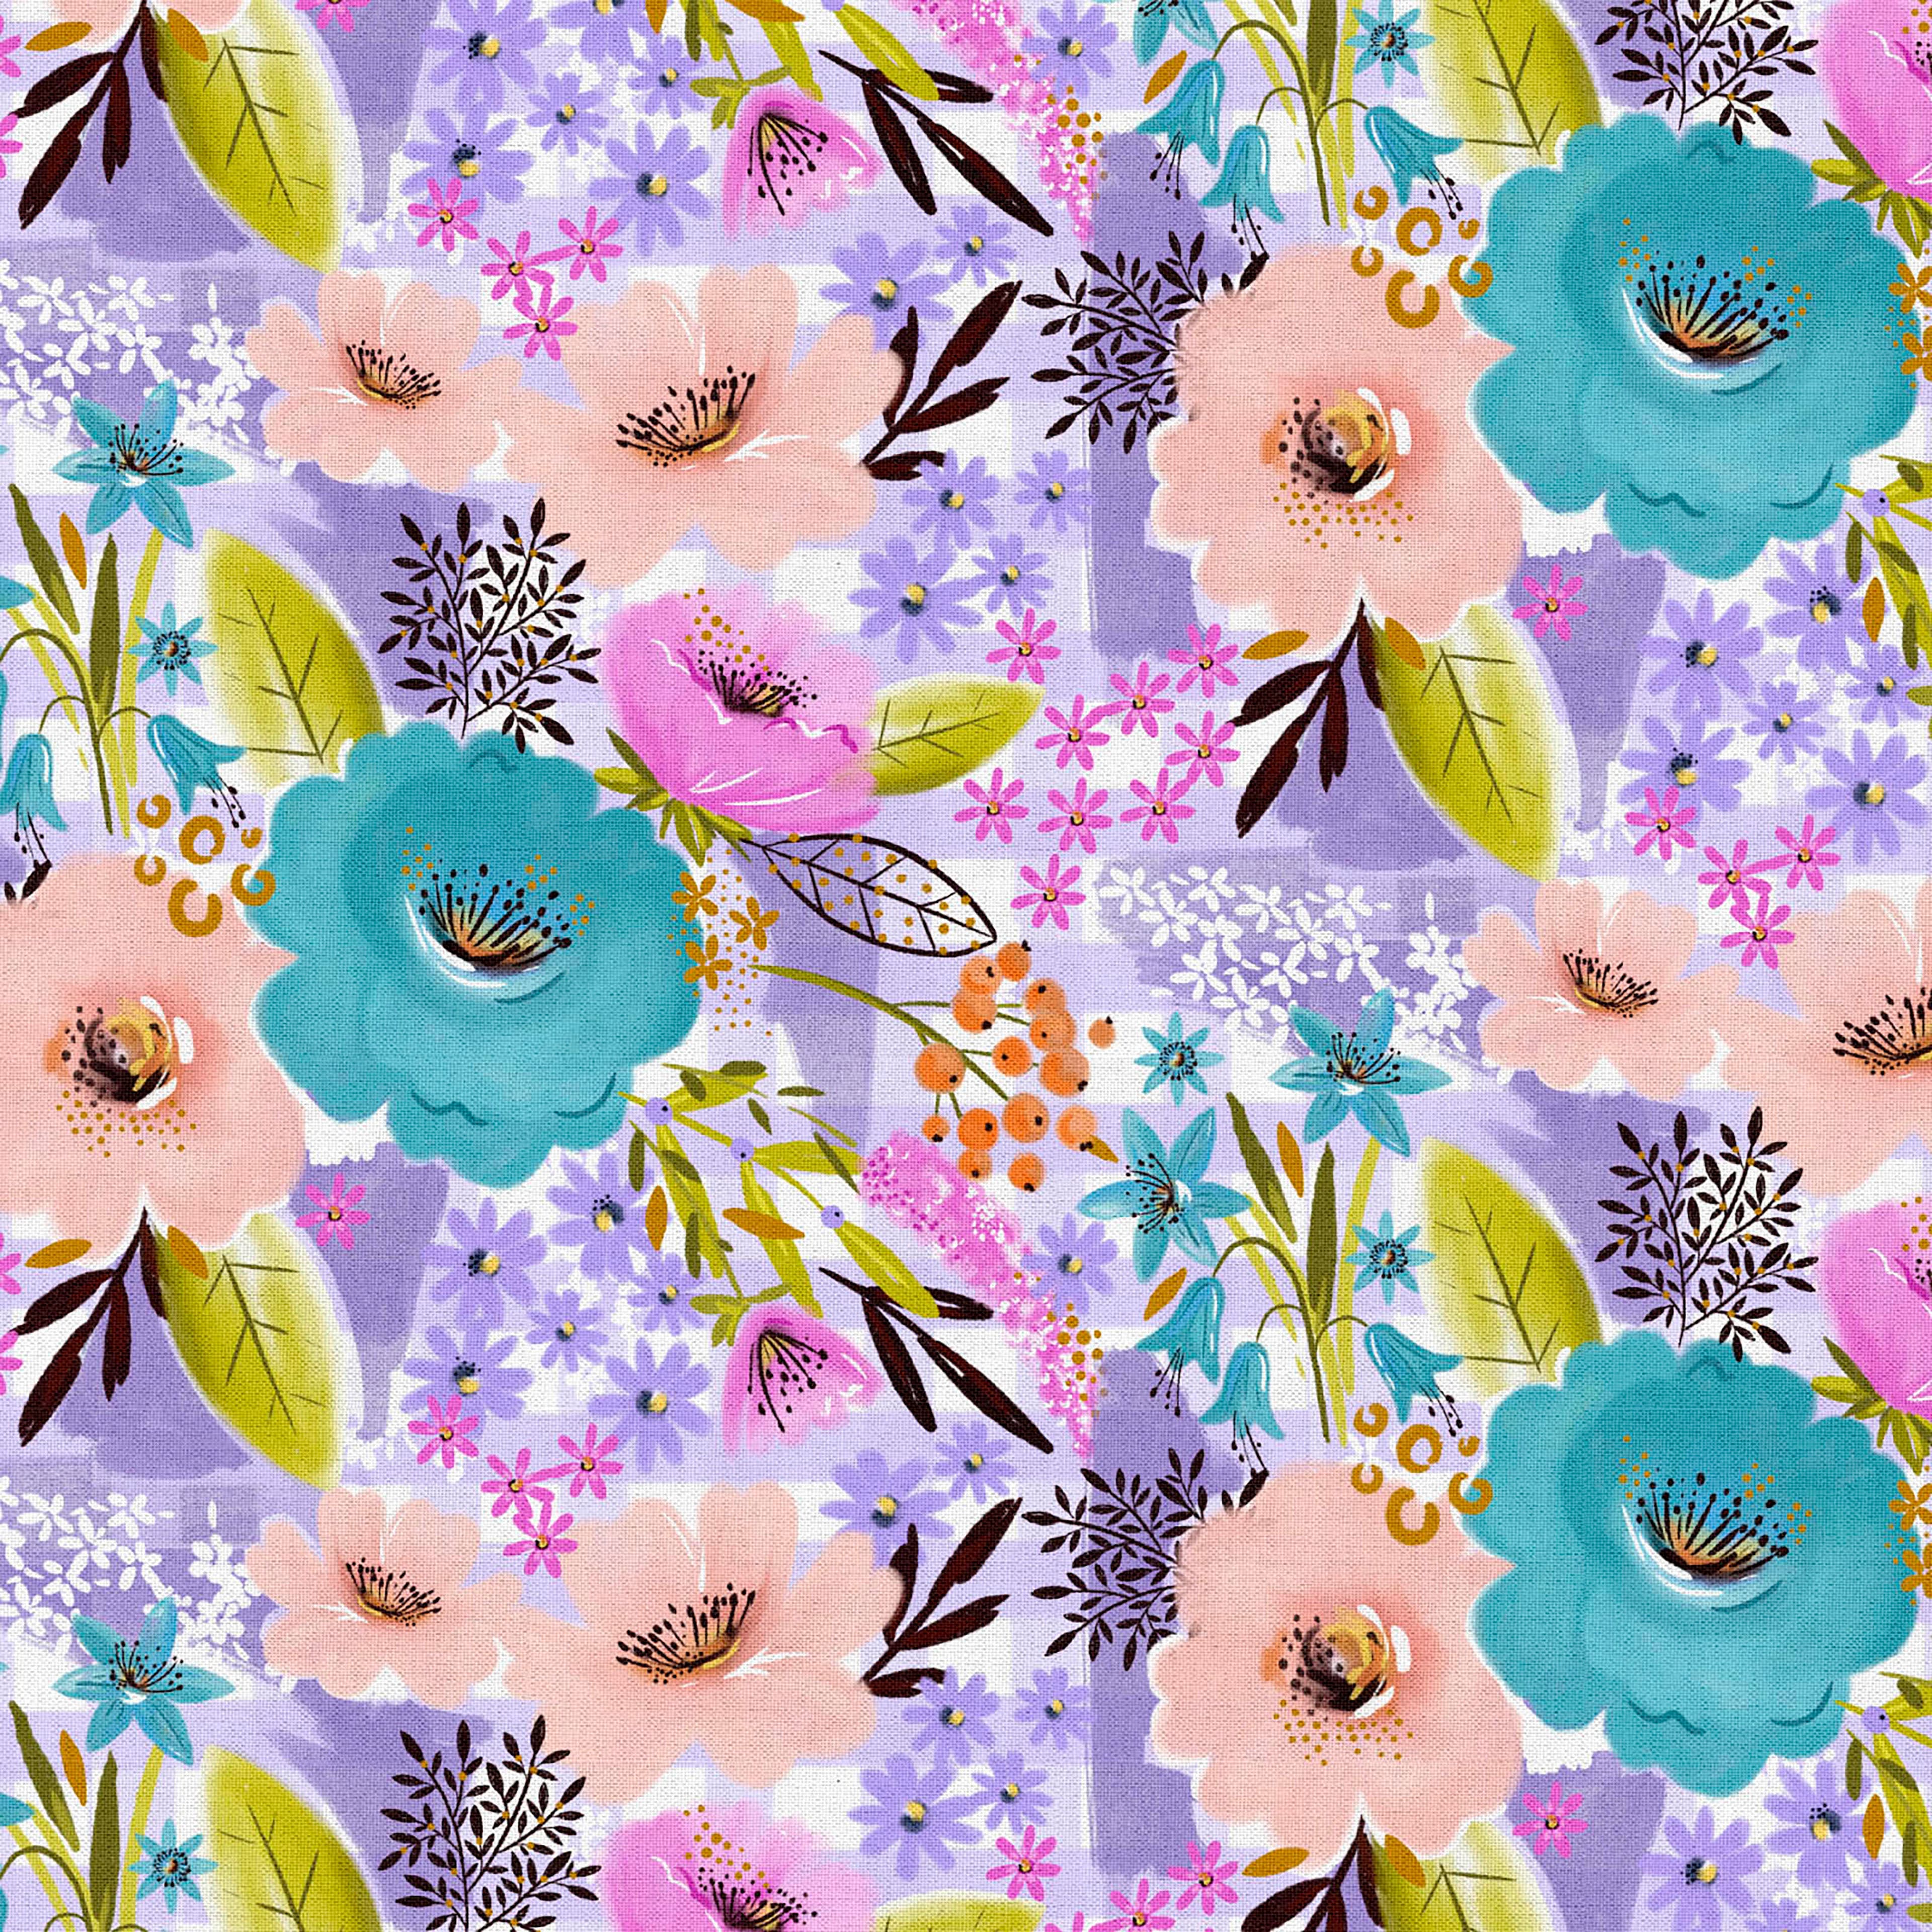 Fabric Editions Floral Cotton Fabric